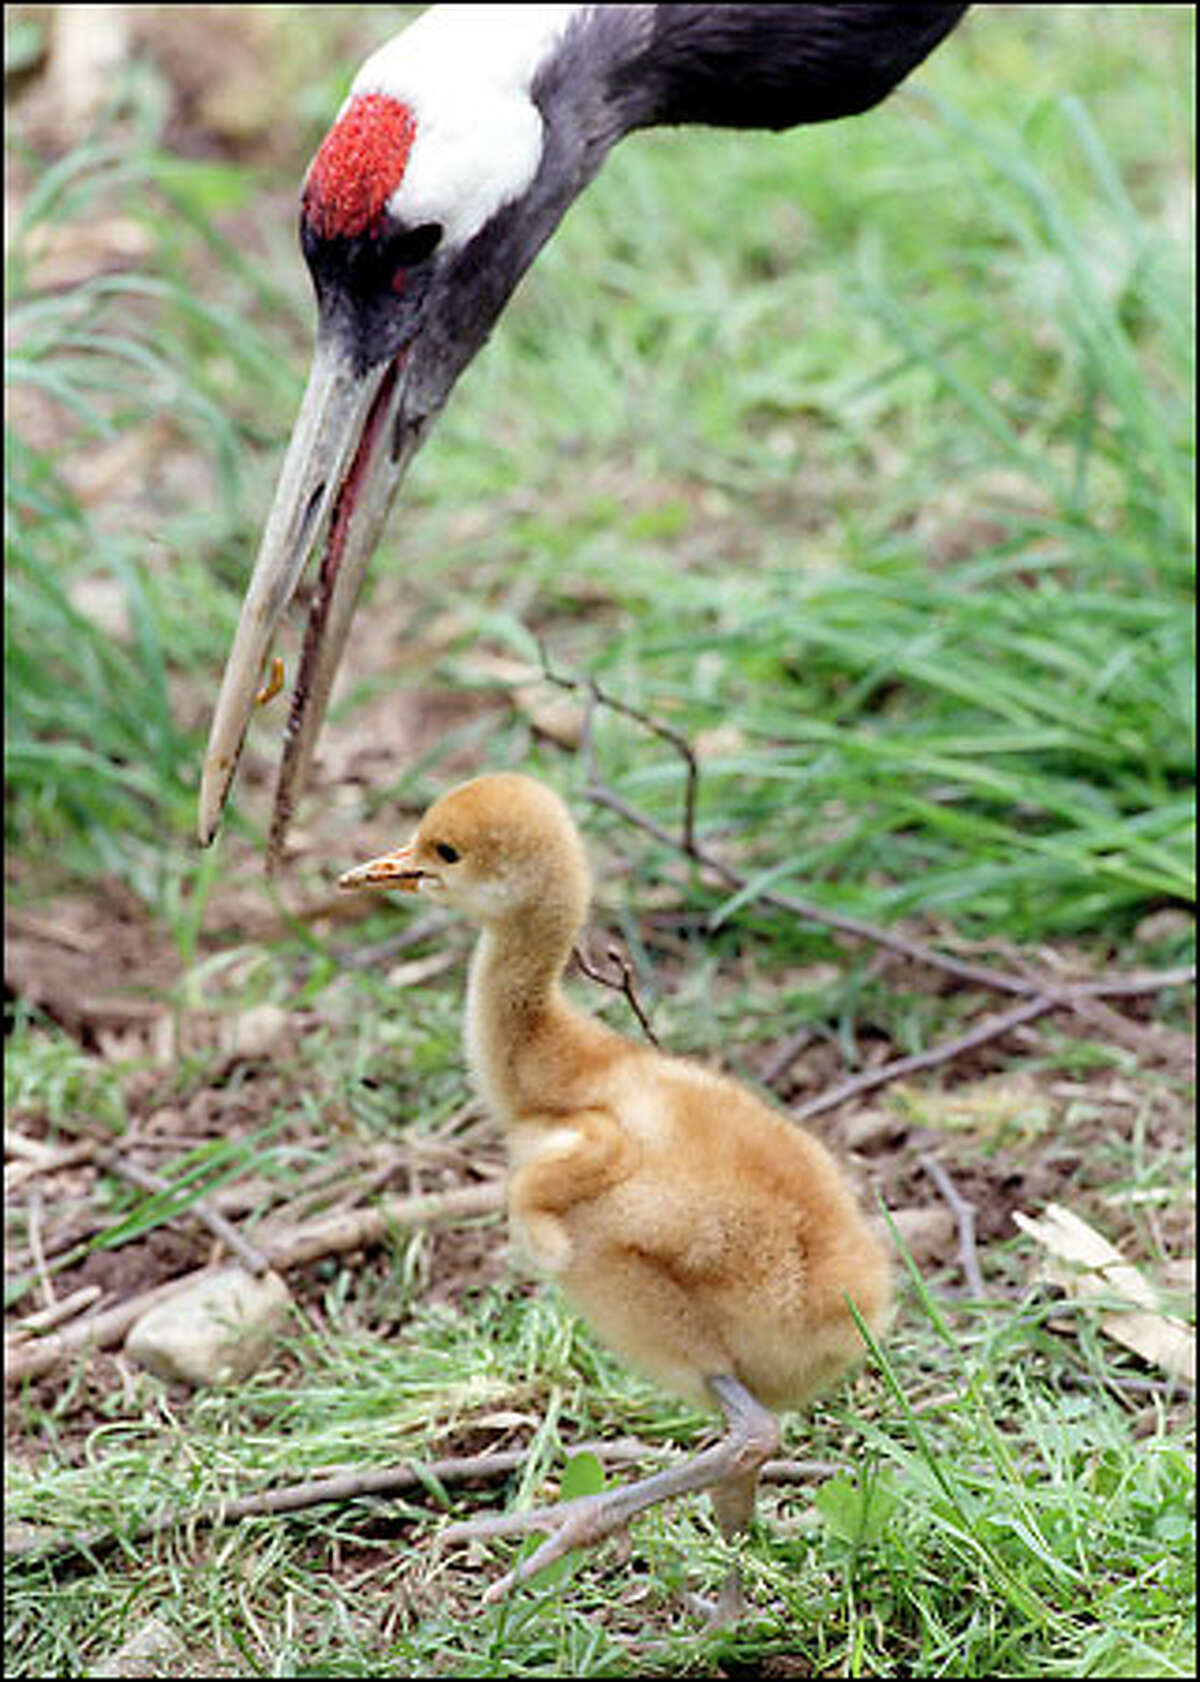 This is a one-week-old baby Red-Crowned Crane at Woodland Park Zoo. The chick is watched over by it’s dad.